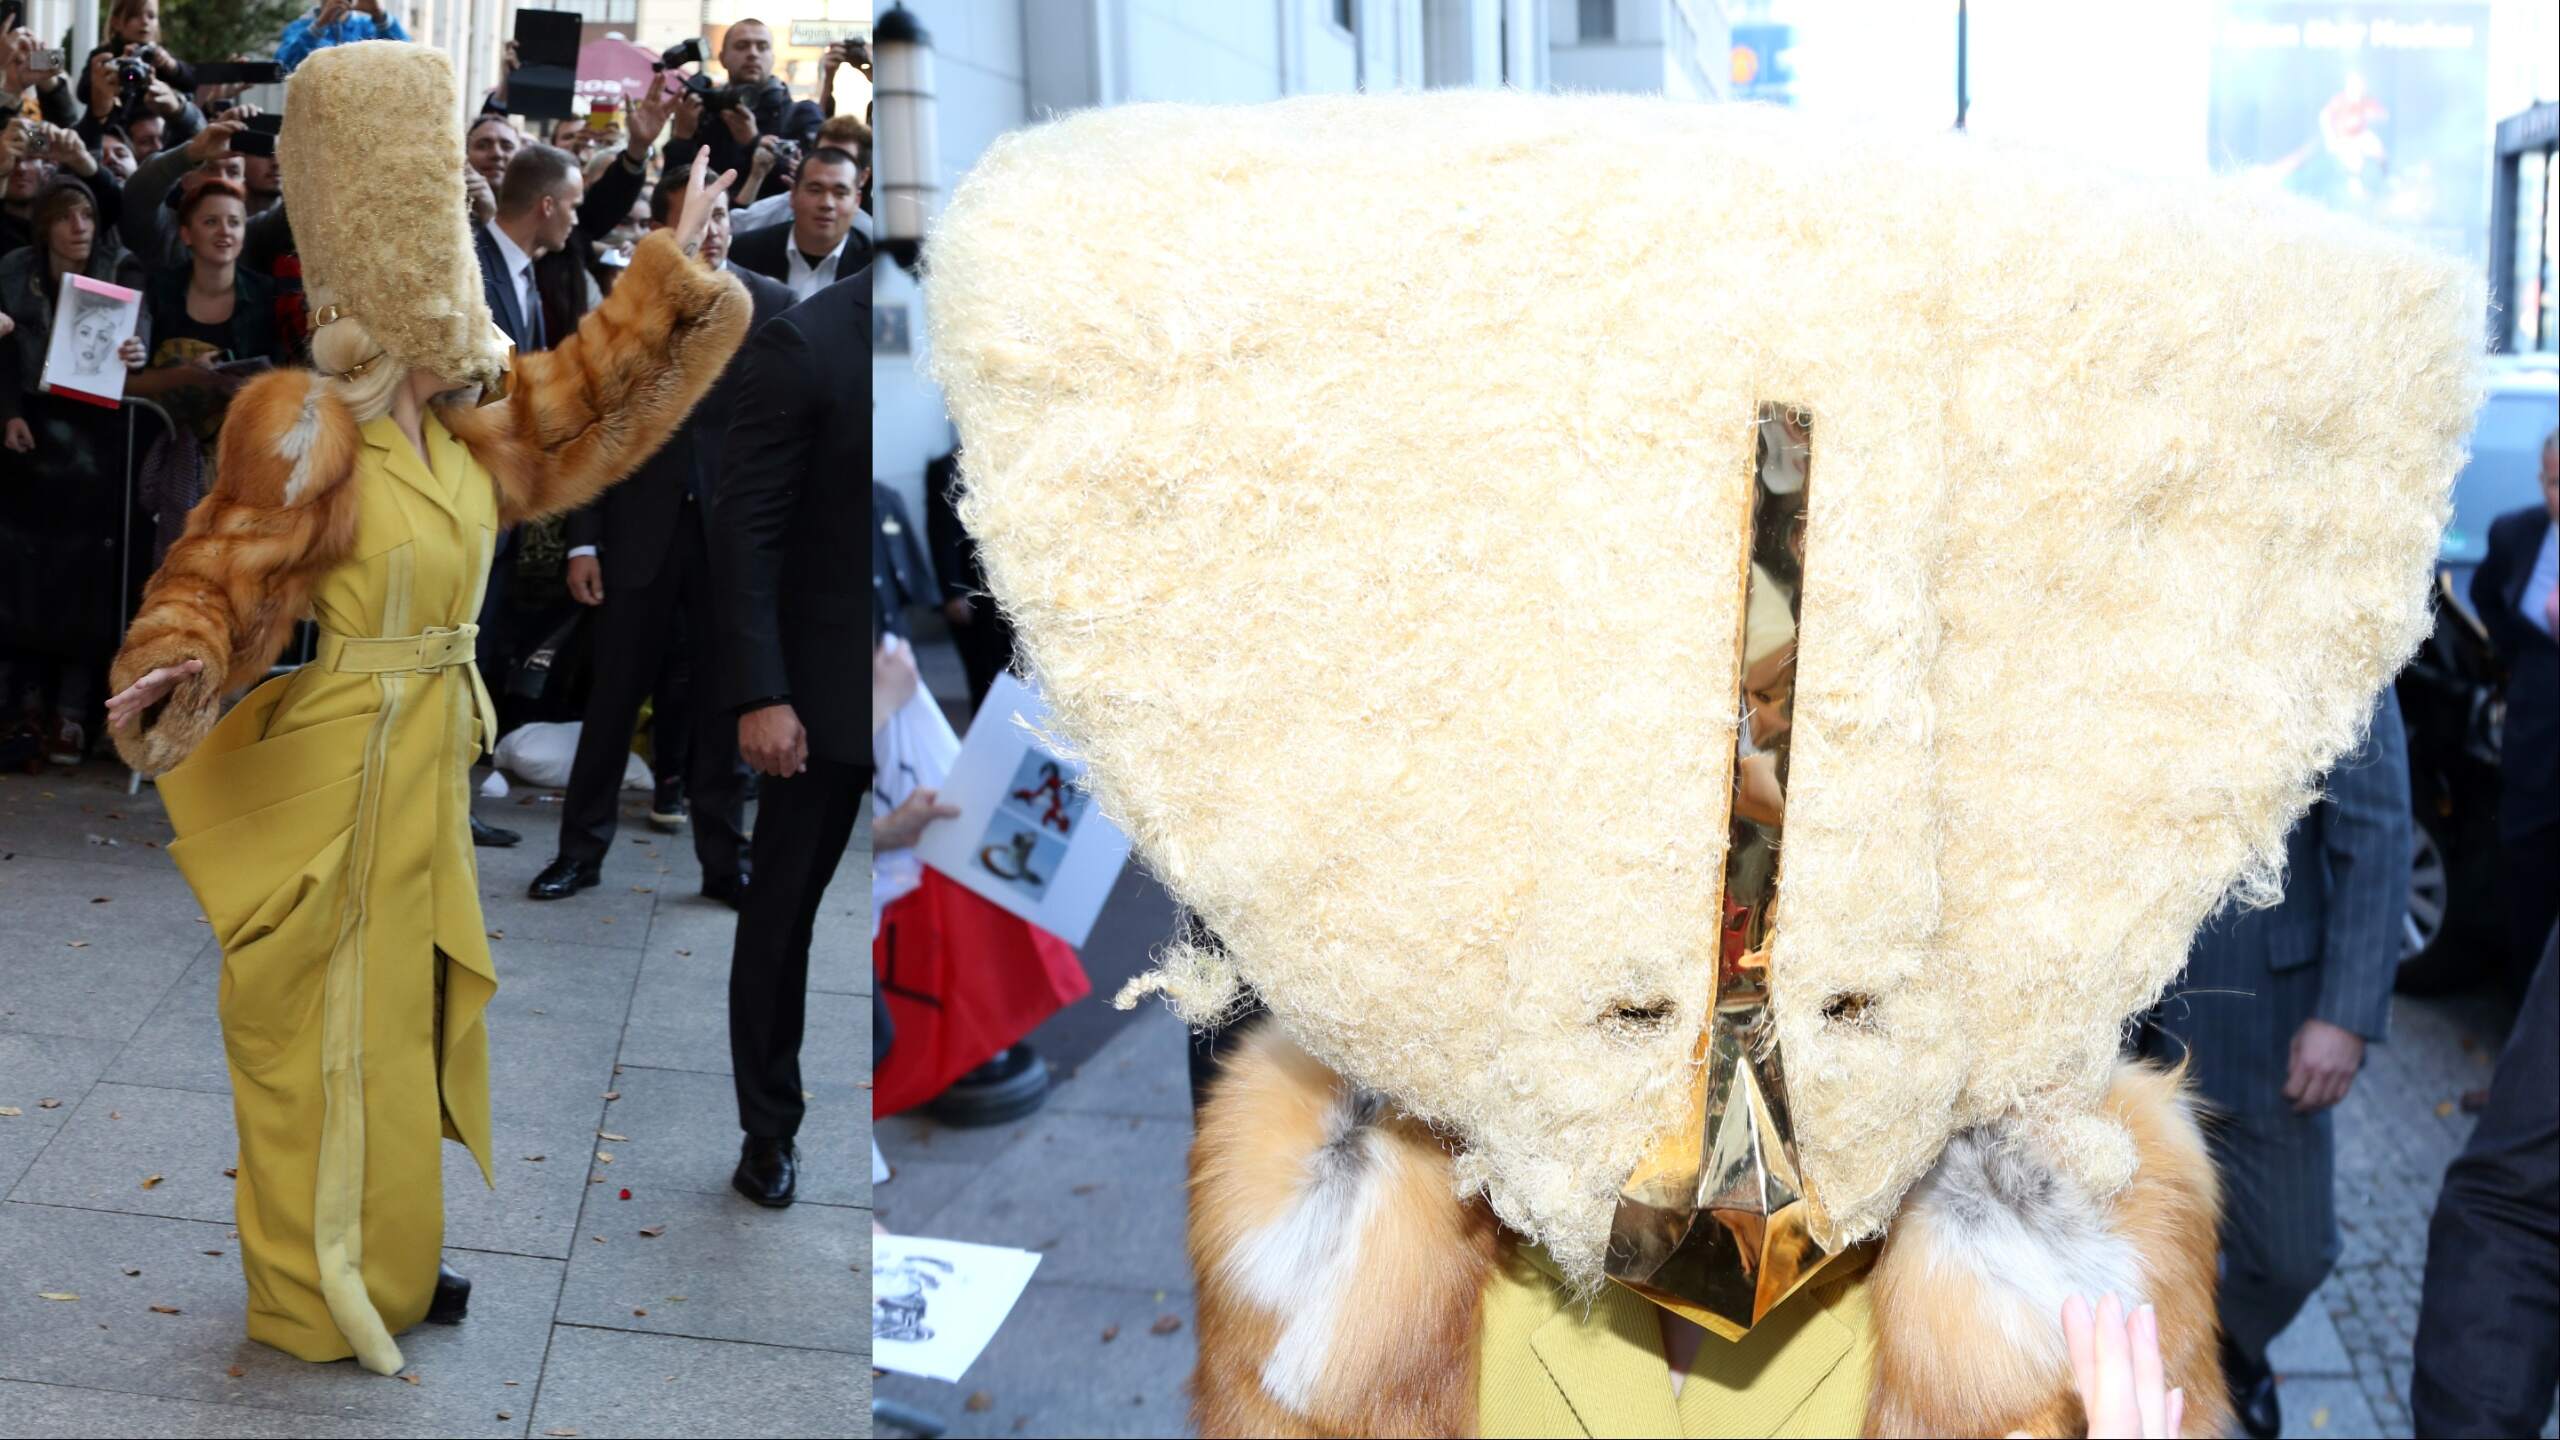 Singr Lady Gaga wears a furry head covering and waves to fans